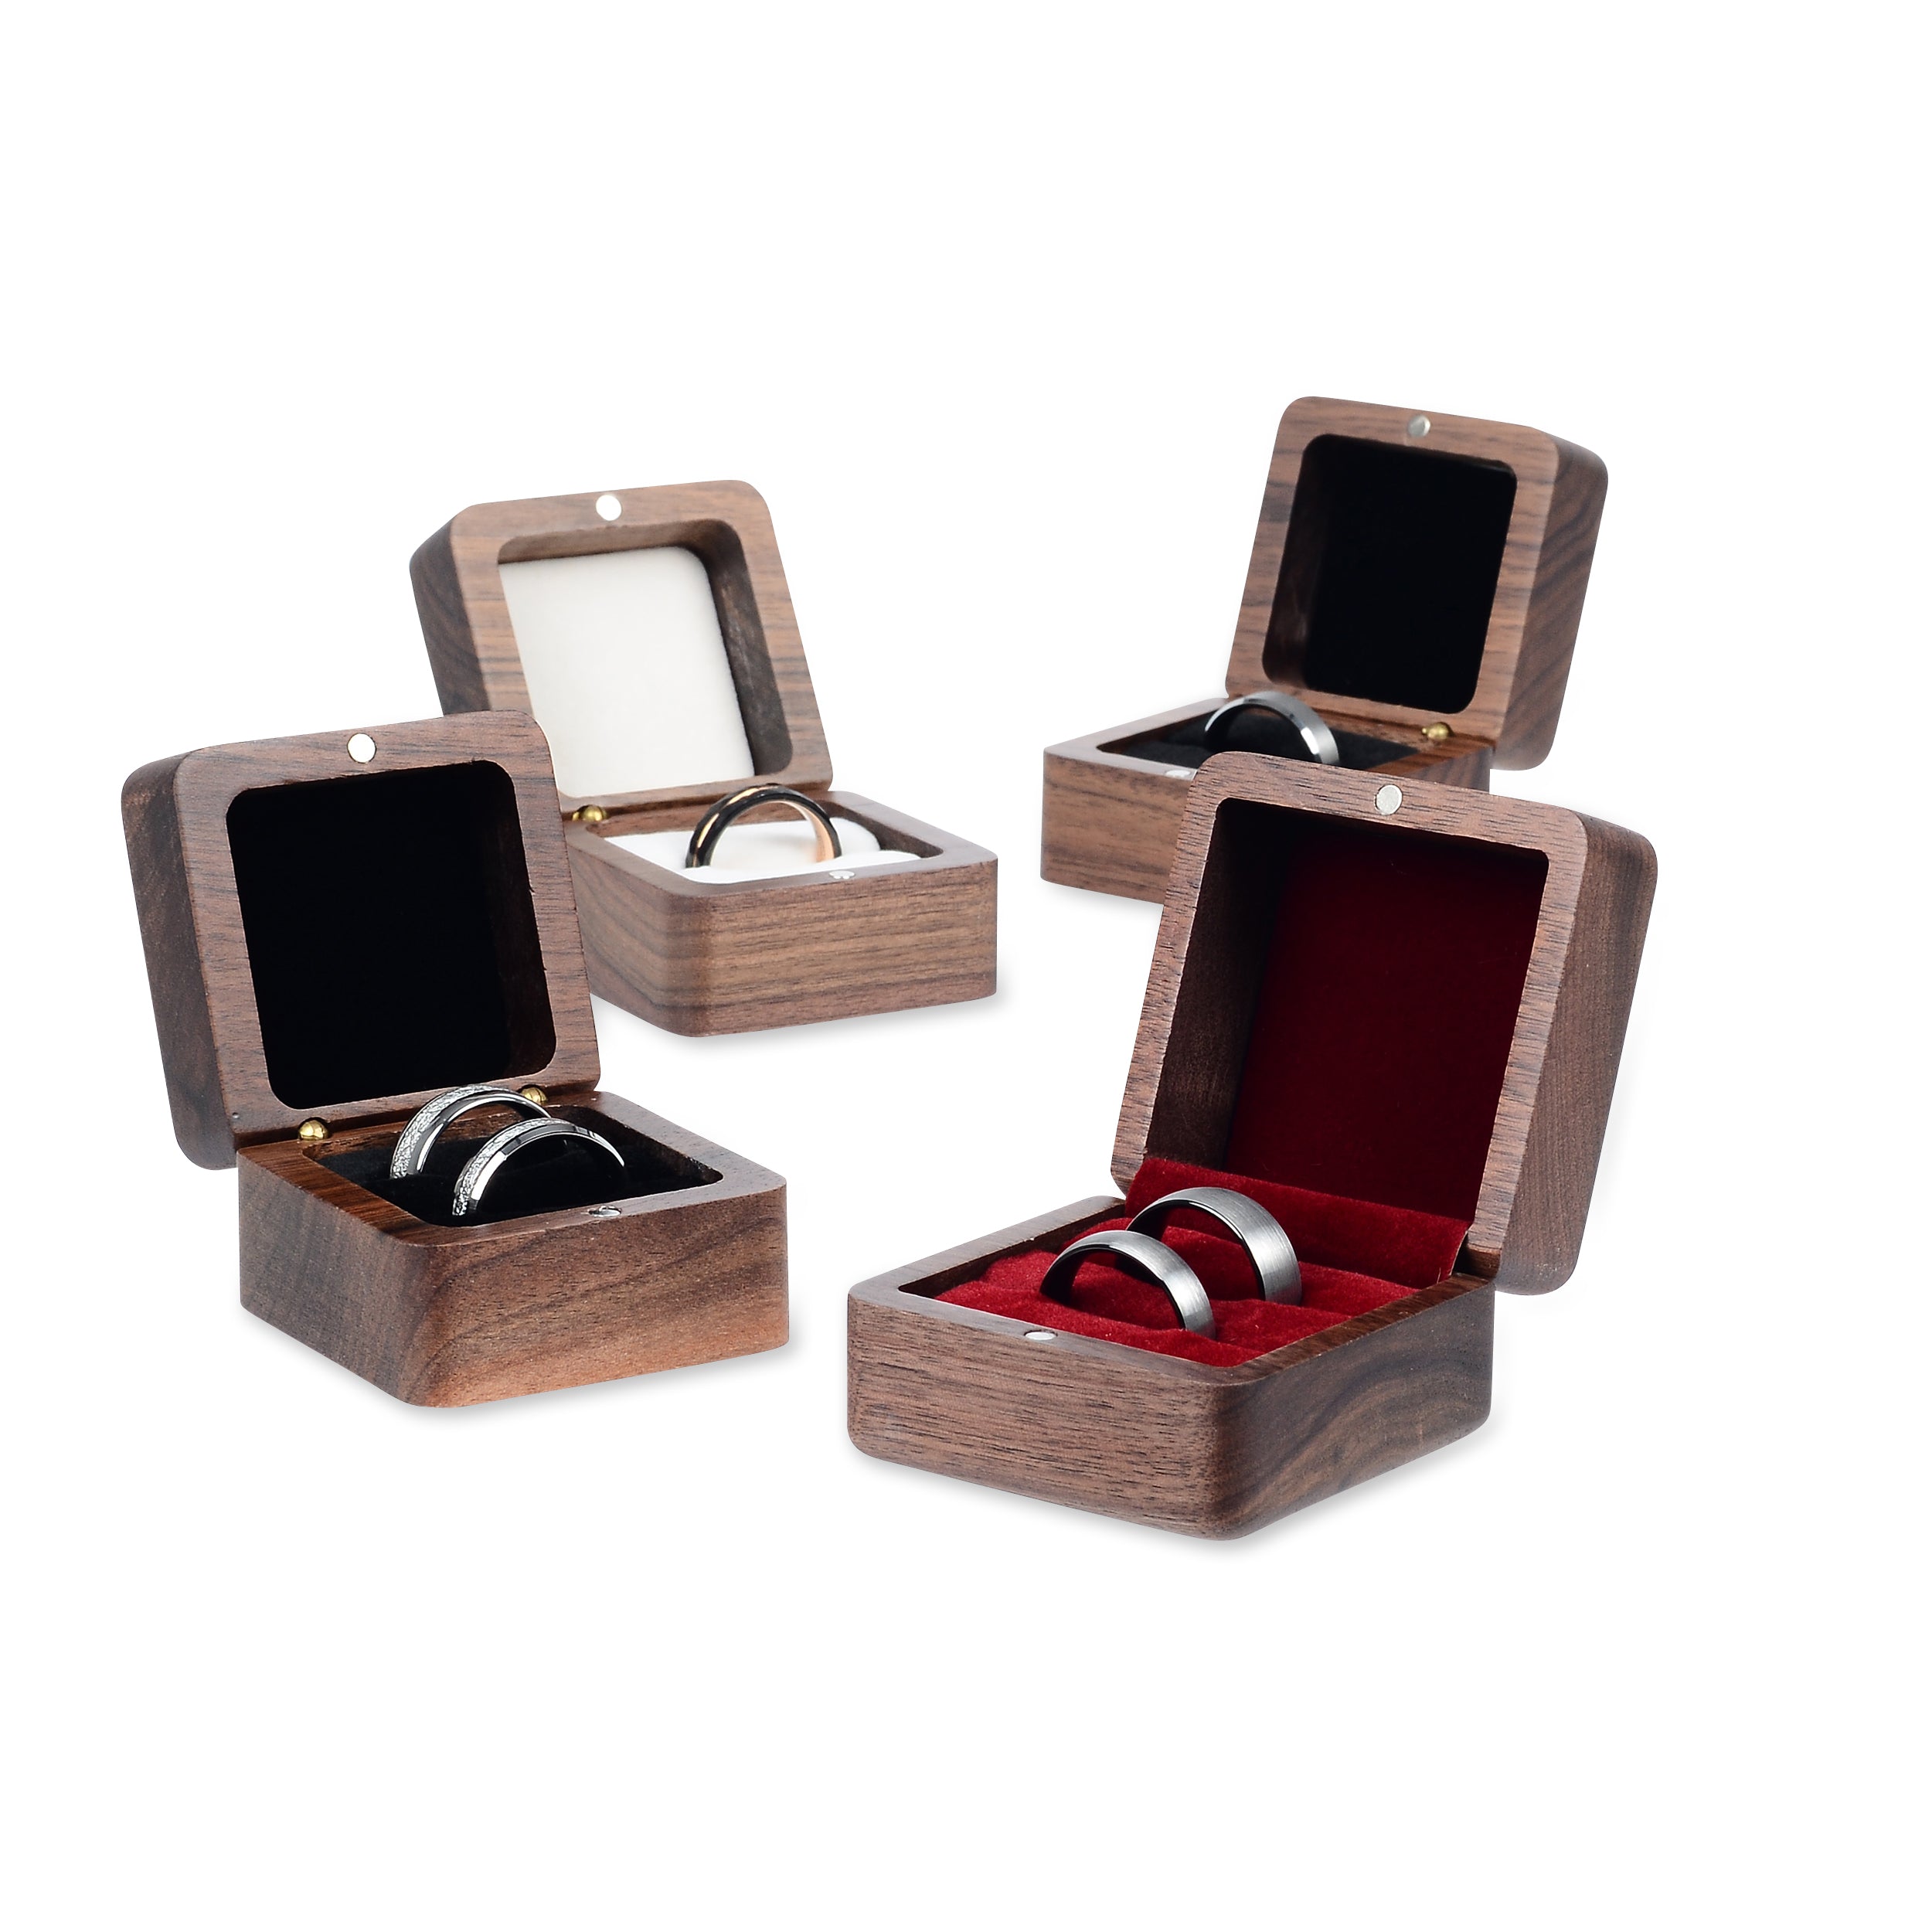 Red Double Ring Case - Premium Real Wood Velvet Cushion Ring Box With Magnetic Lid